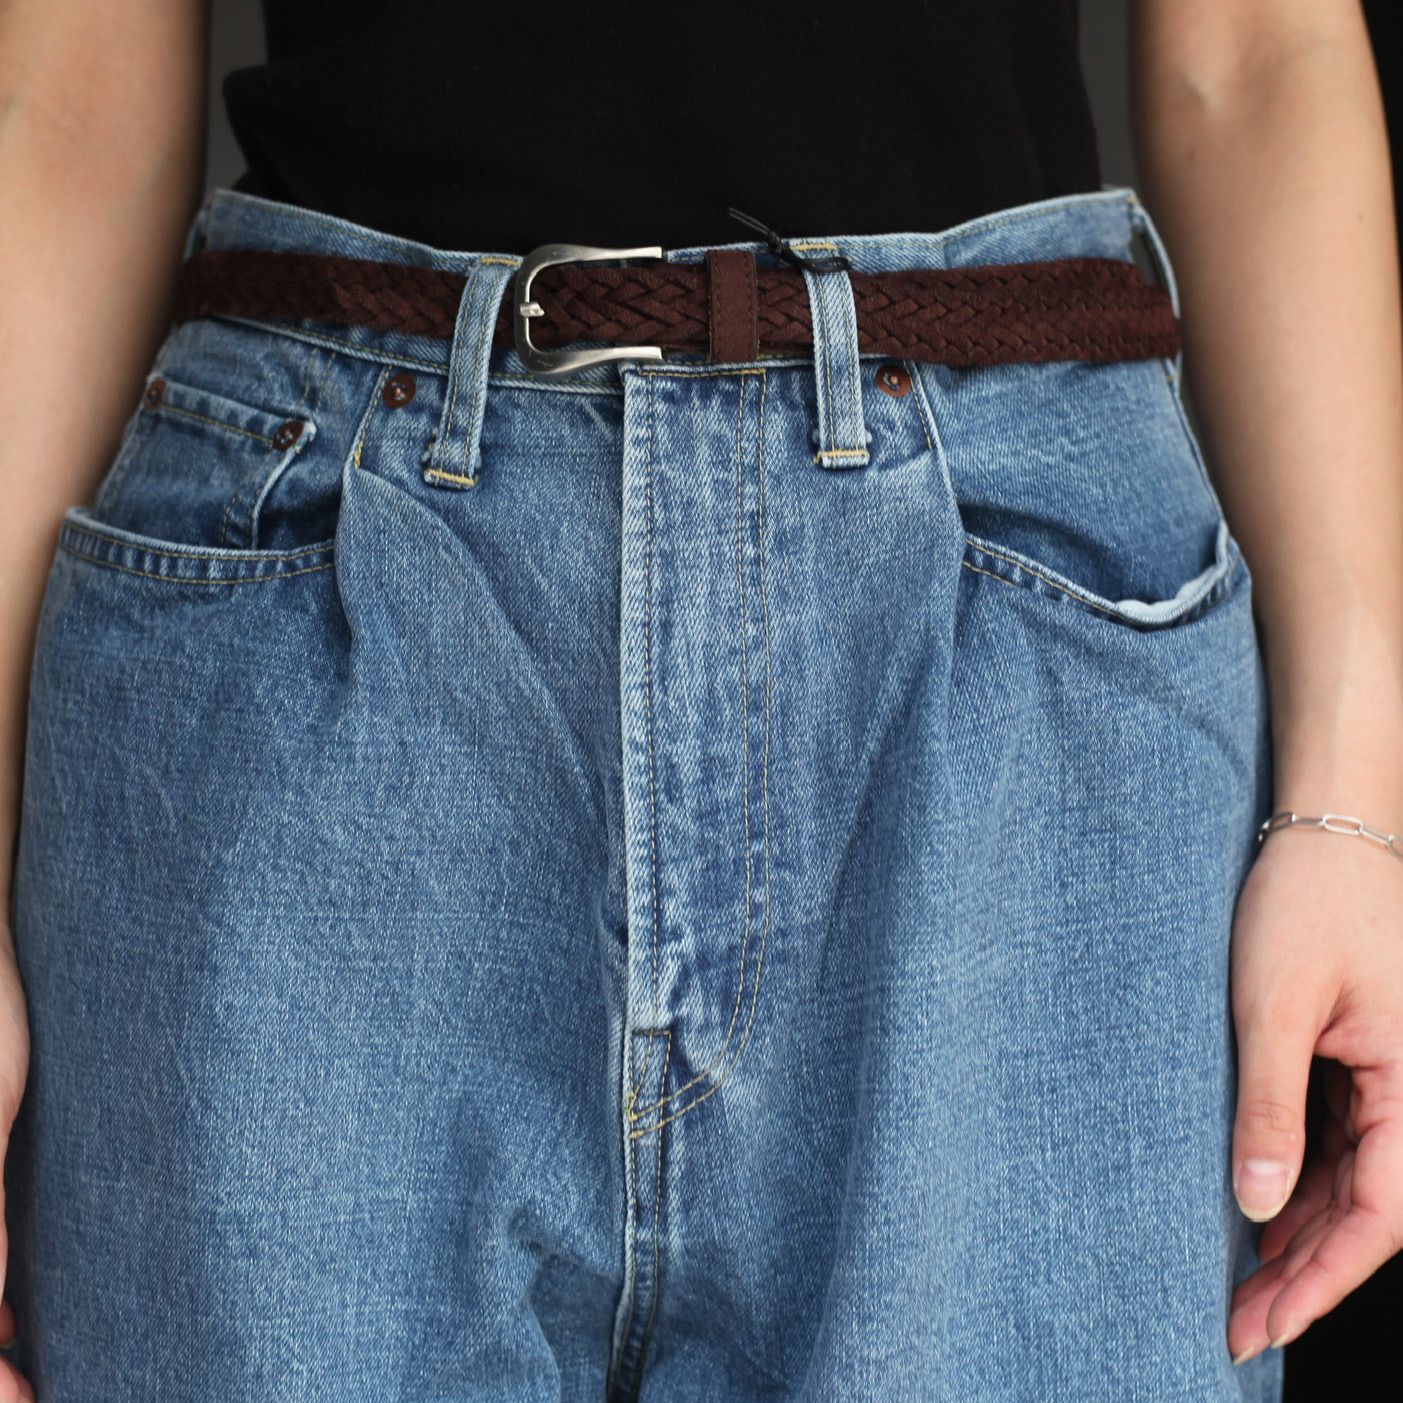 stein - 【残りわずか】Vintage Reproduction Damage Wide Denim Jeans 